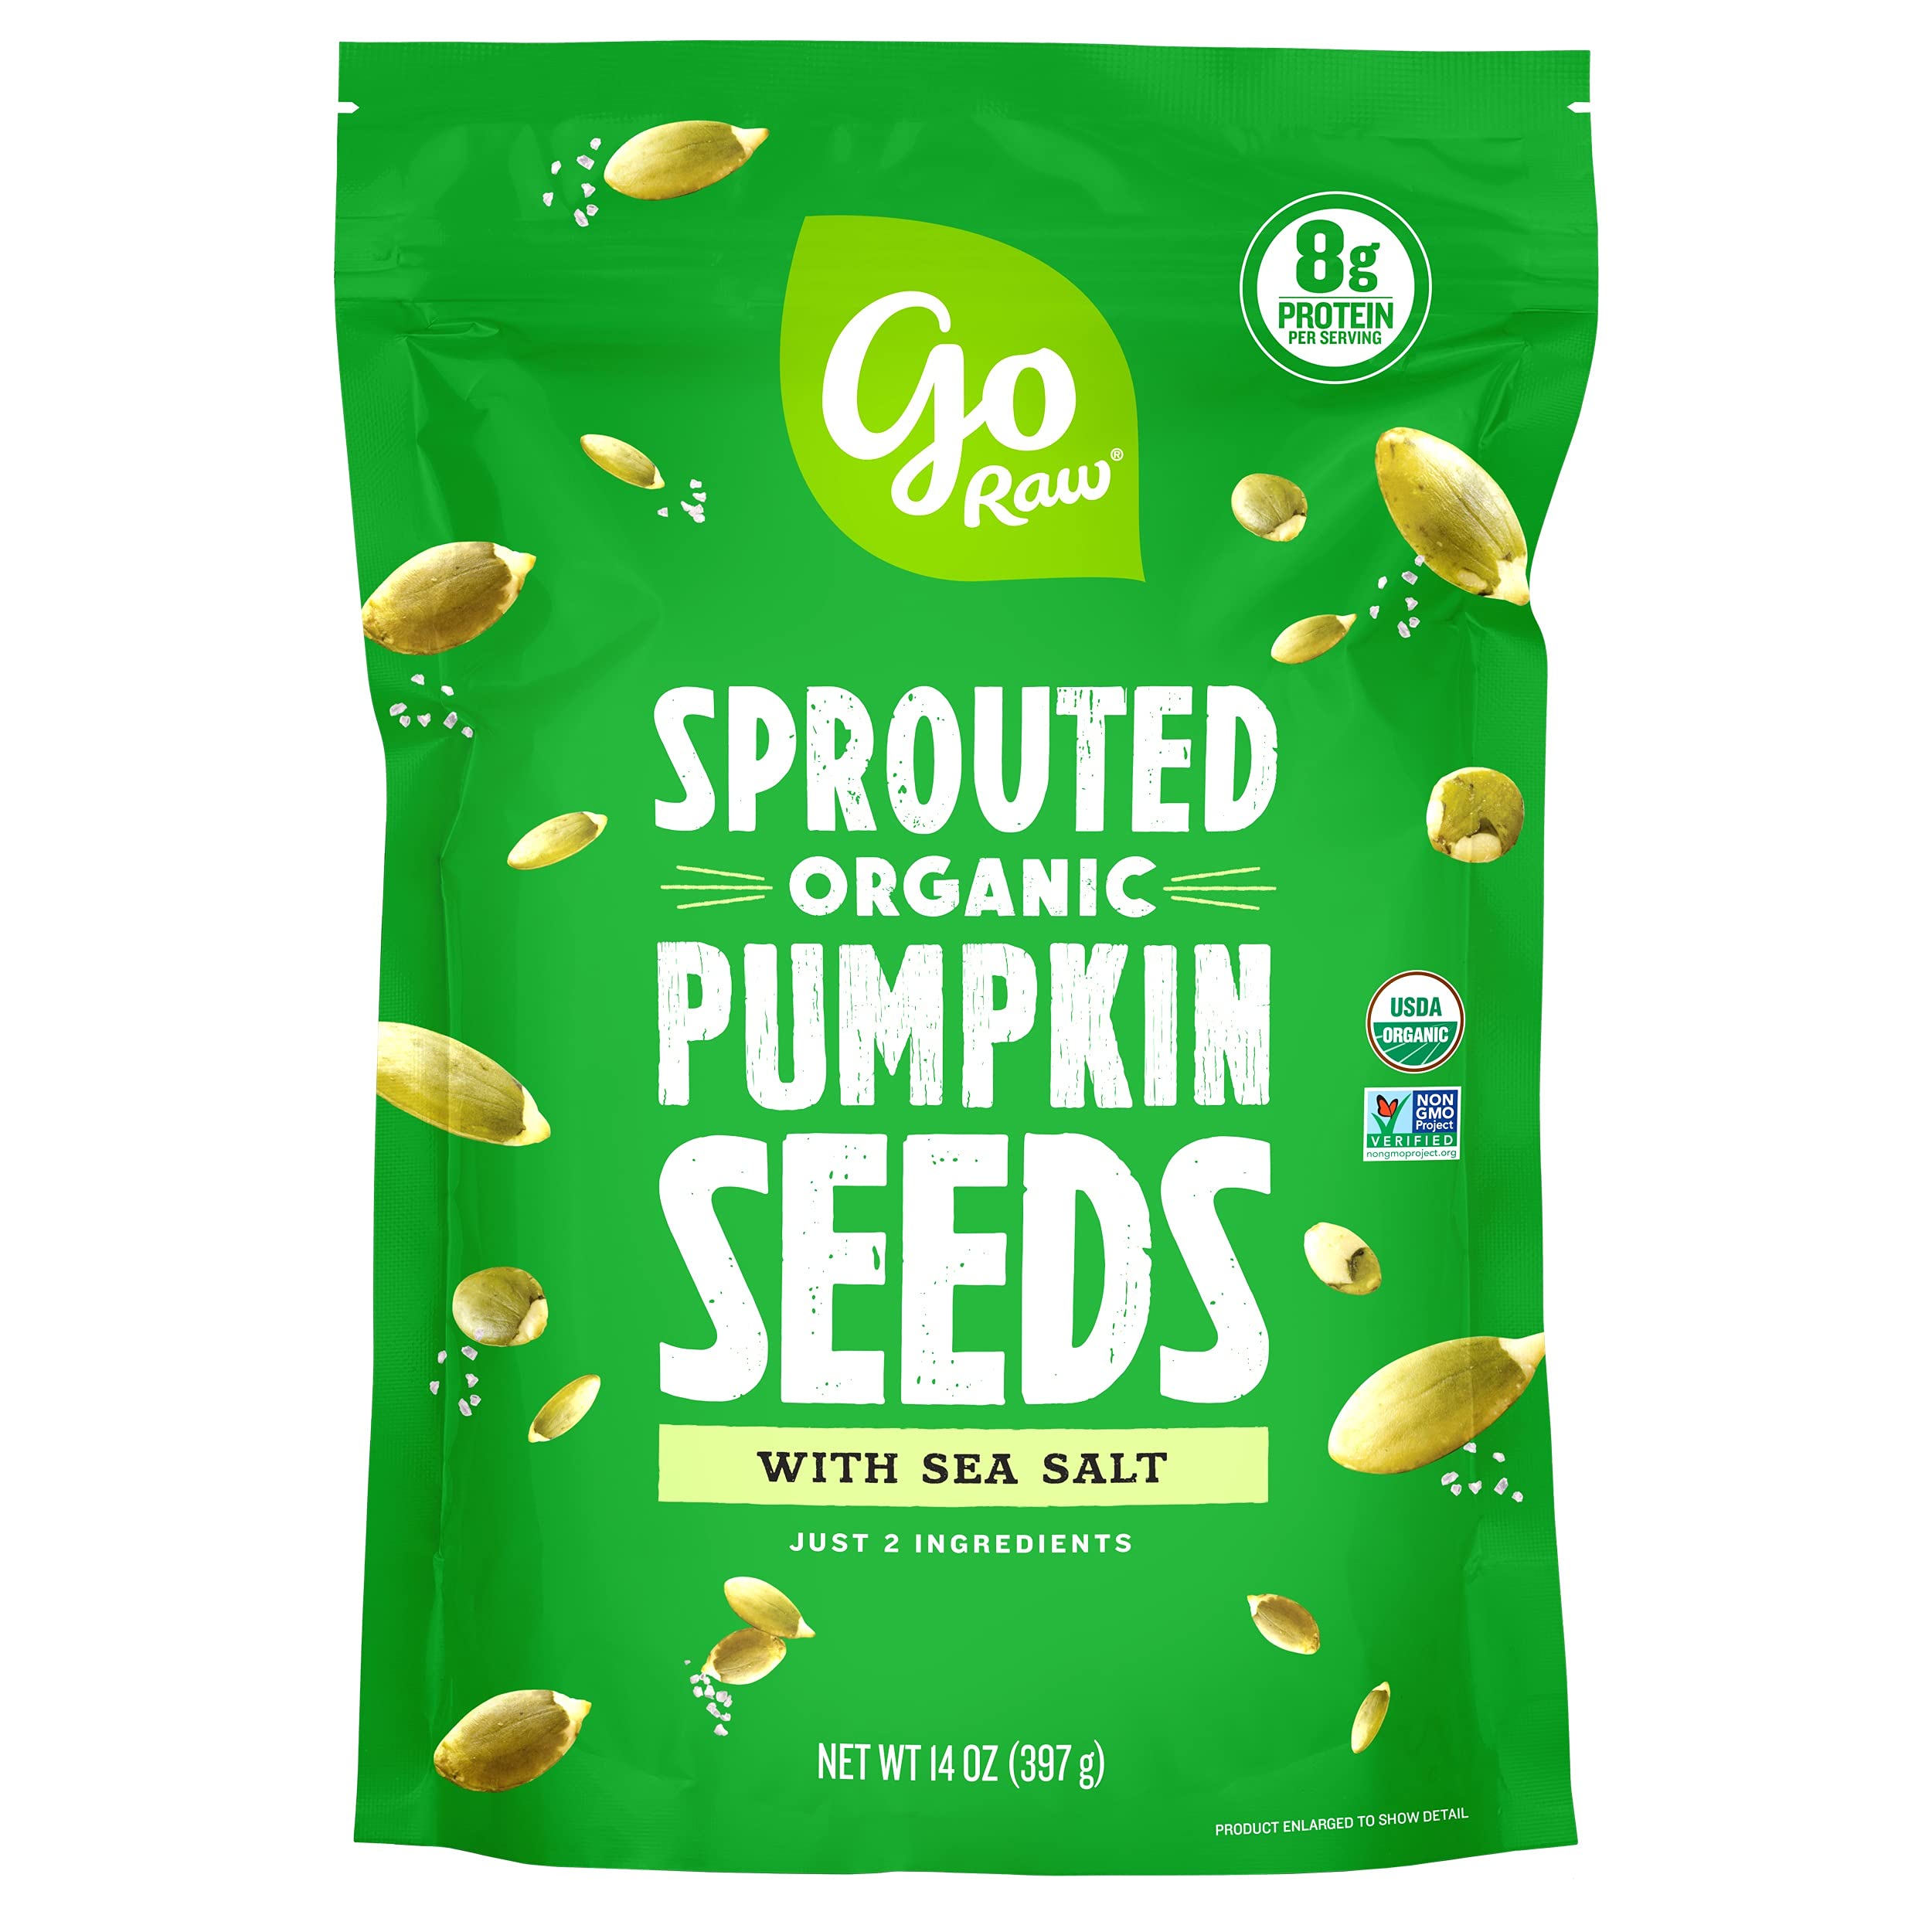 Go Raw Sprouted Pumpkin Seeds Organic $8.50 or $7.23 with S&S or $8.07 with SNAP EBT.  Protein superfood. Amazon ($8.08 w/5%)